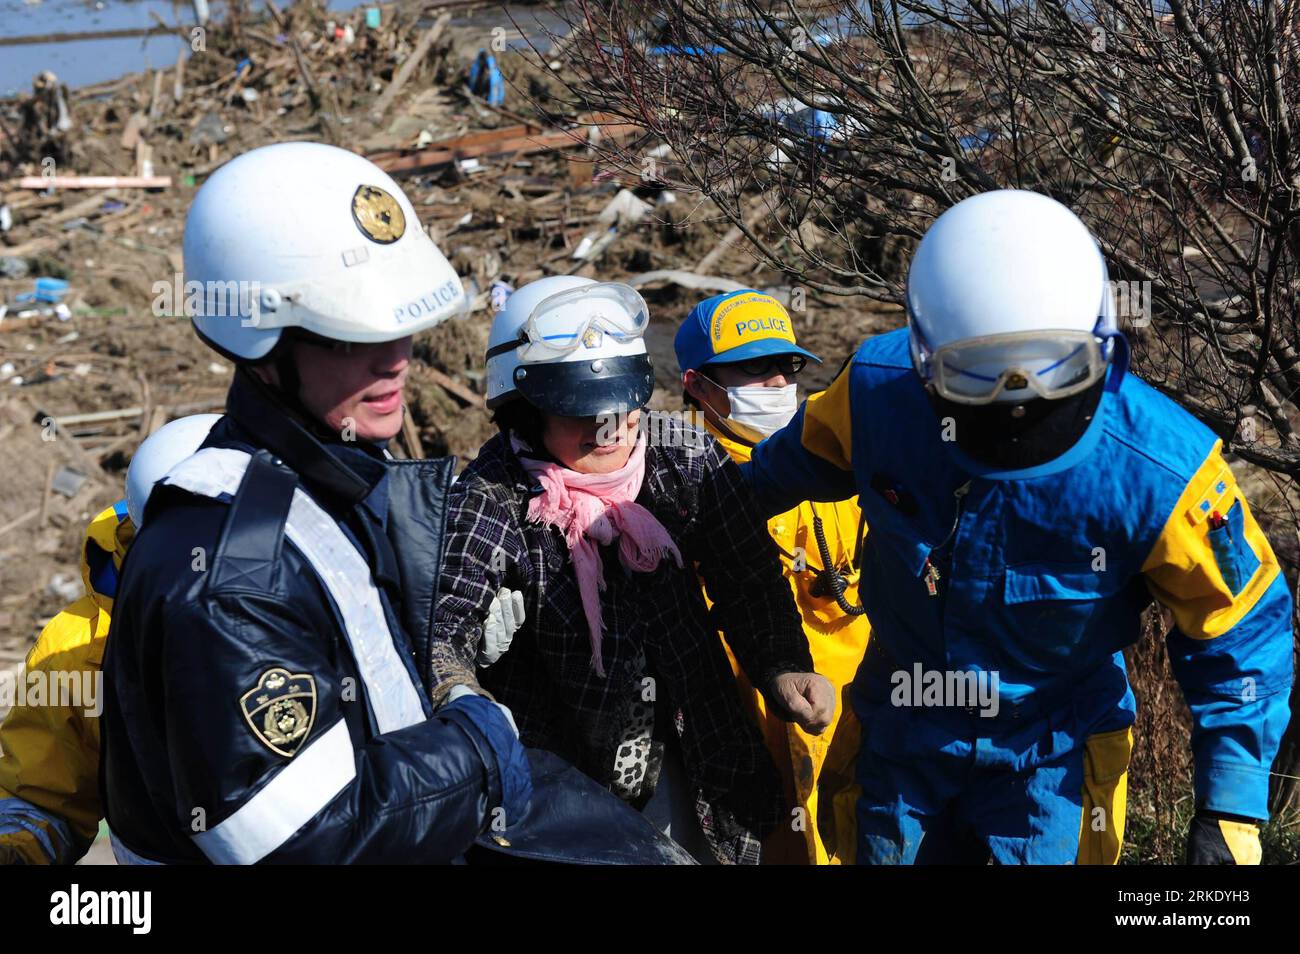 Bildnummer: 55019314  Datum: 13.03.2011  Copyright: imago/Xinhua SENDAI, March 13, 2011 (Xinhua) -- Rescuers save a survivor from the deribs at Sanbontsuka of Wakabayashi in Sendai City, Miyagi Prefecture, Japan, March 13, 2011. The area lost contact with the outside world after Friday s quake. Friday s catastrophic earthquake in Japan and the following devastating tsunami have ravaged the country, while massive rescue and recovery efforts have been quickly launched to save lives and minimize losses. (Xinhua/Ji Chunpeng)(yc) JAPAN-QUAKE PUBLICATIONxNOTxINxCHN Gesellschaft Naturkatastrophe Erdb Stock Photo